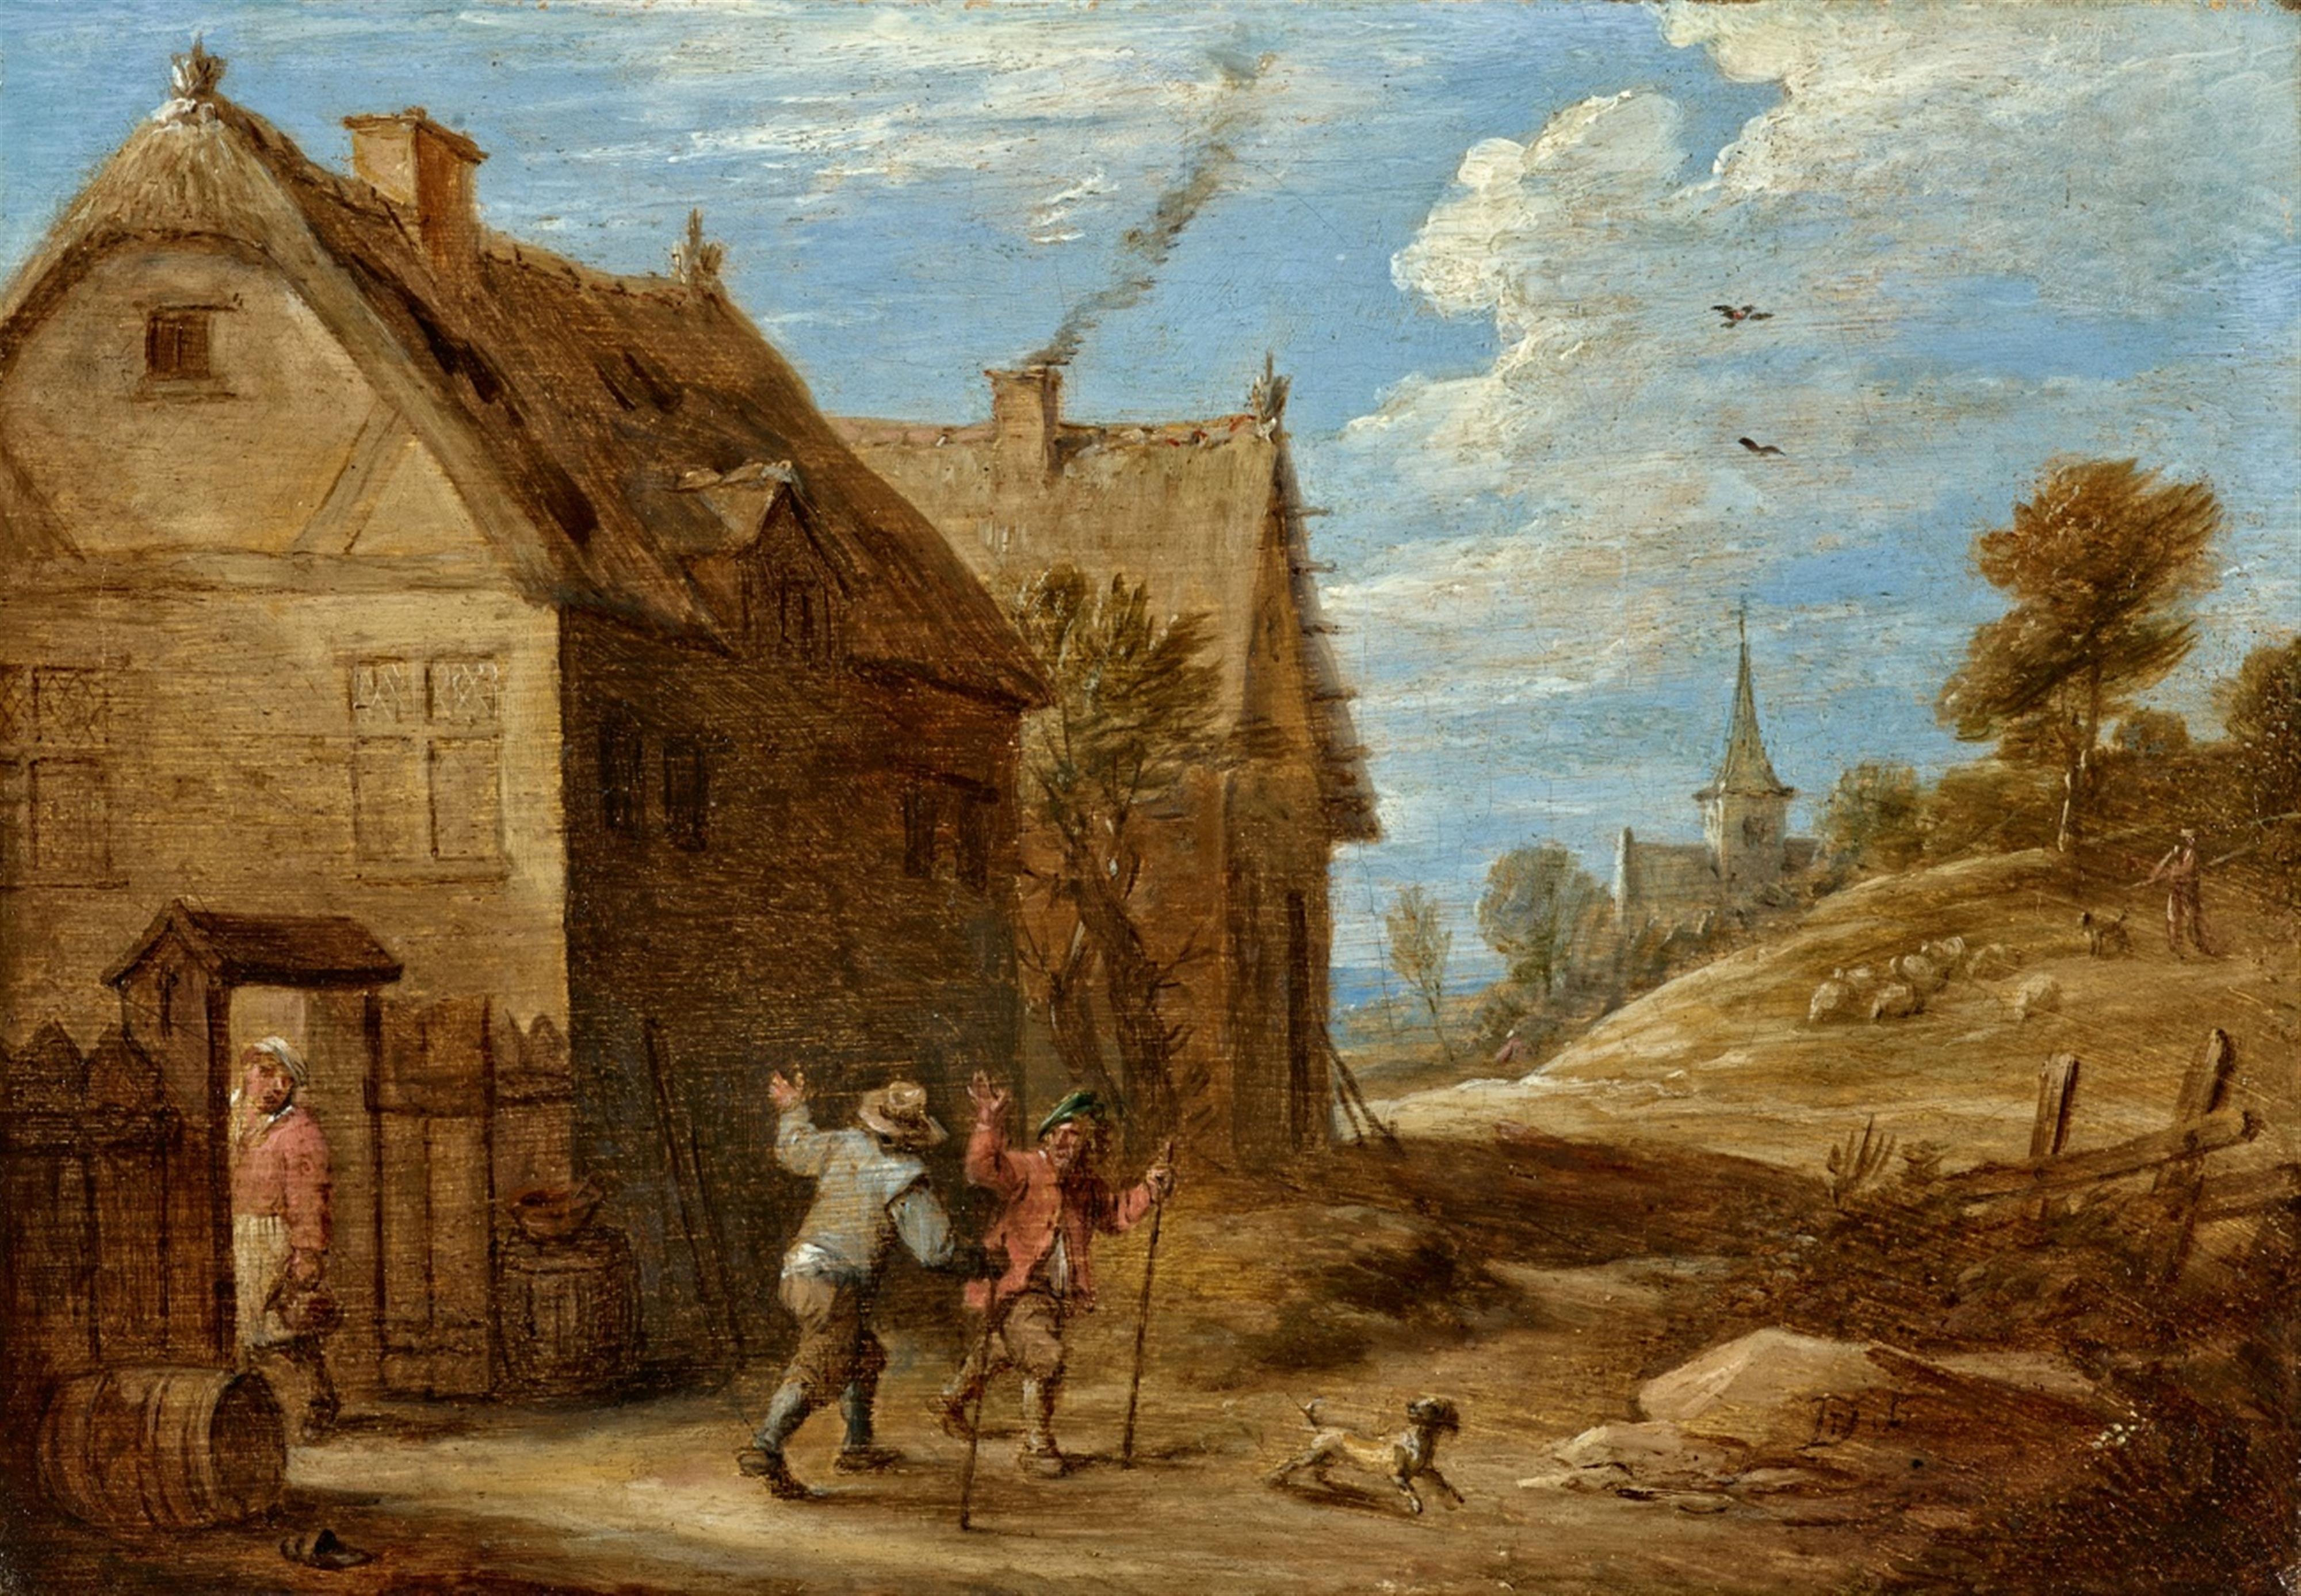 David Teniers the Younger - Winter Landscape with a Peasant Couple Spring Landscape with Two Peasants saying Farewell - image-2